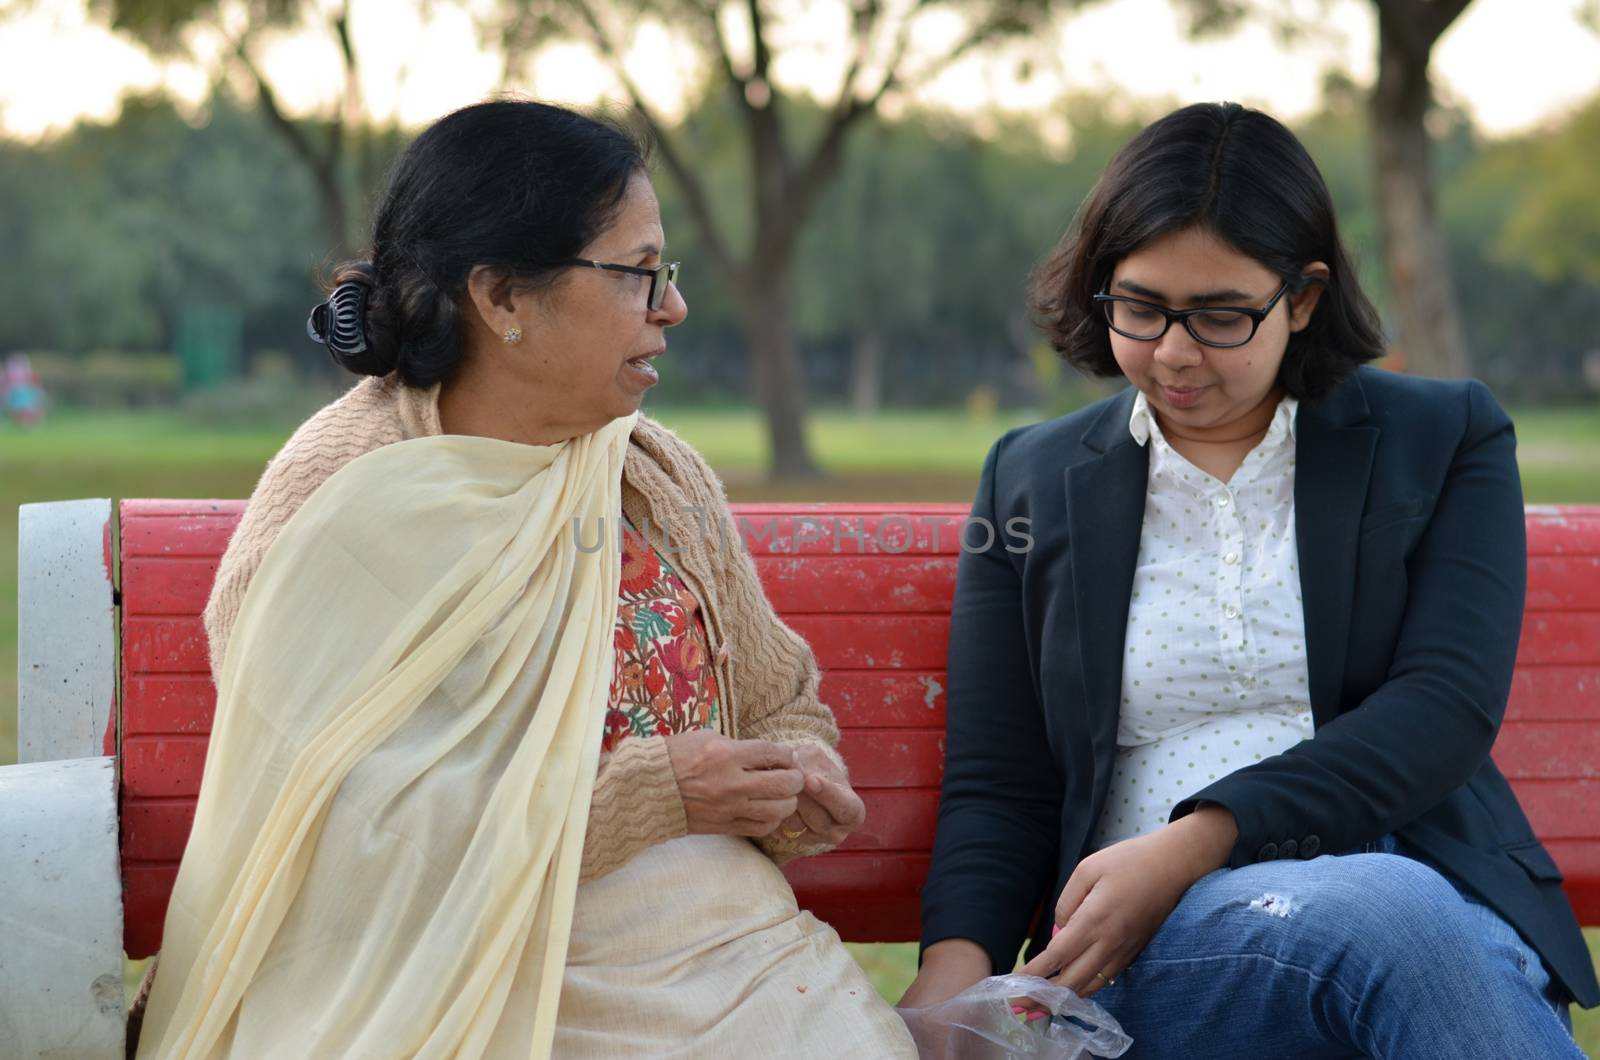 Shot of a senior retired Indian woman sitting in a park with her daughter in law on a red bench peeling peanuts, and eating them. Concept - Happy Retired life